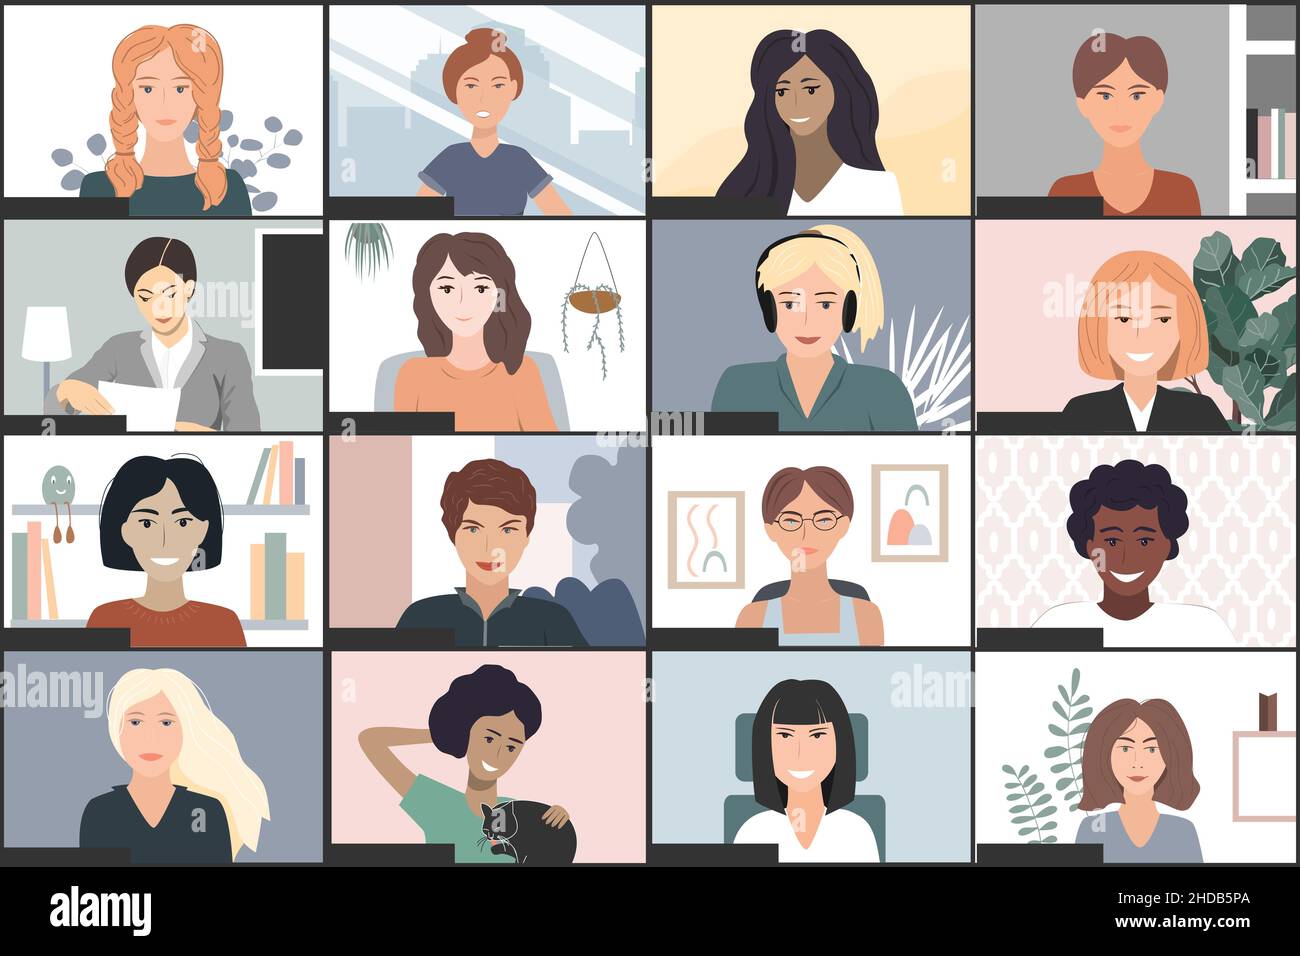 Screen of woman videoconference application. Vector illustration of online meeting of studying, chatting or working distantly from home. Computer Stock Vector